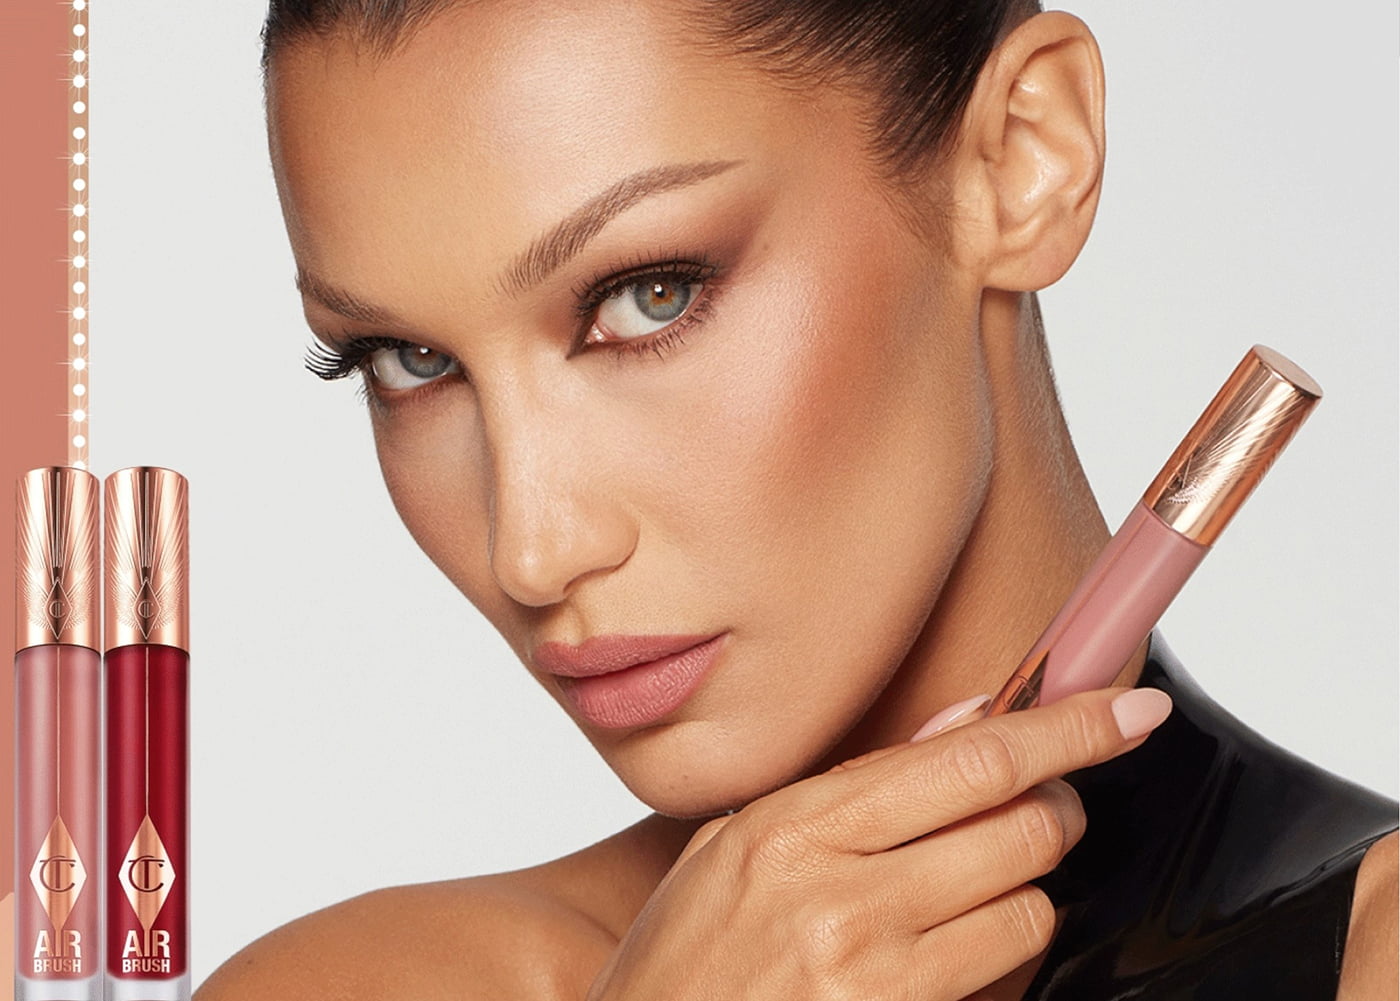 Charlotte Tilbury has released the new Airbrush Flawless Lip Blur in Nude Blur